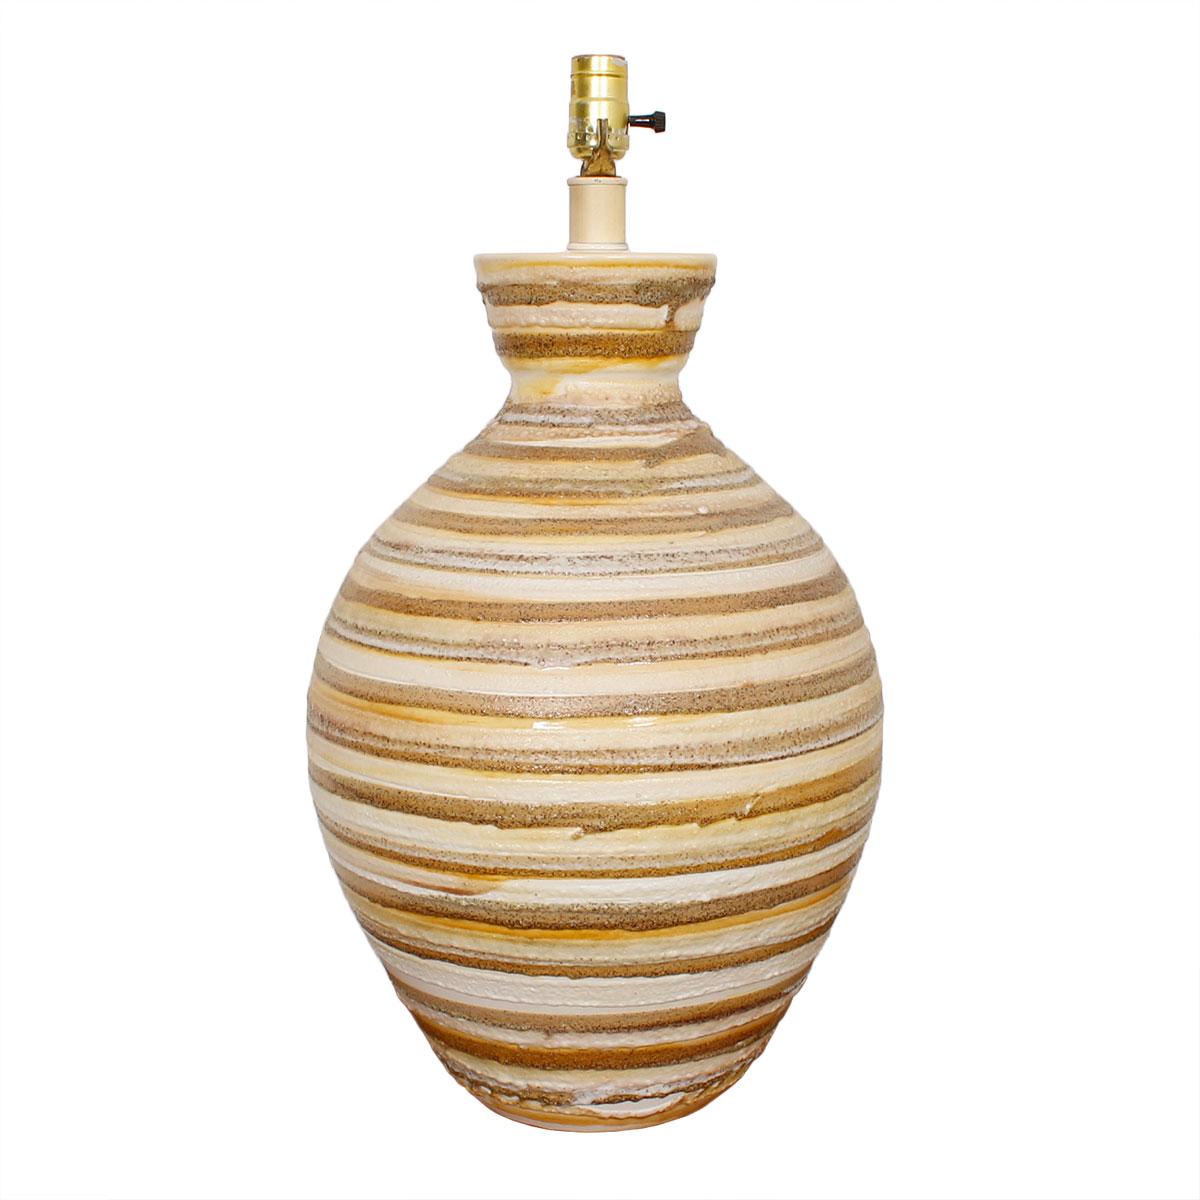 Vintage ‘Beehive’ Striped Lava-Textured Lamp

Additional information:
Material: Lava, Textured
Featured at DC:
Impressively-sized table lamp will make a statement in your room.
A pleasing bulb form, which has been painted around in variegated